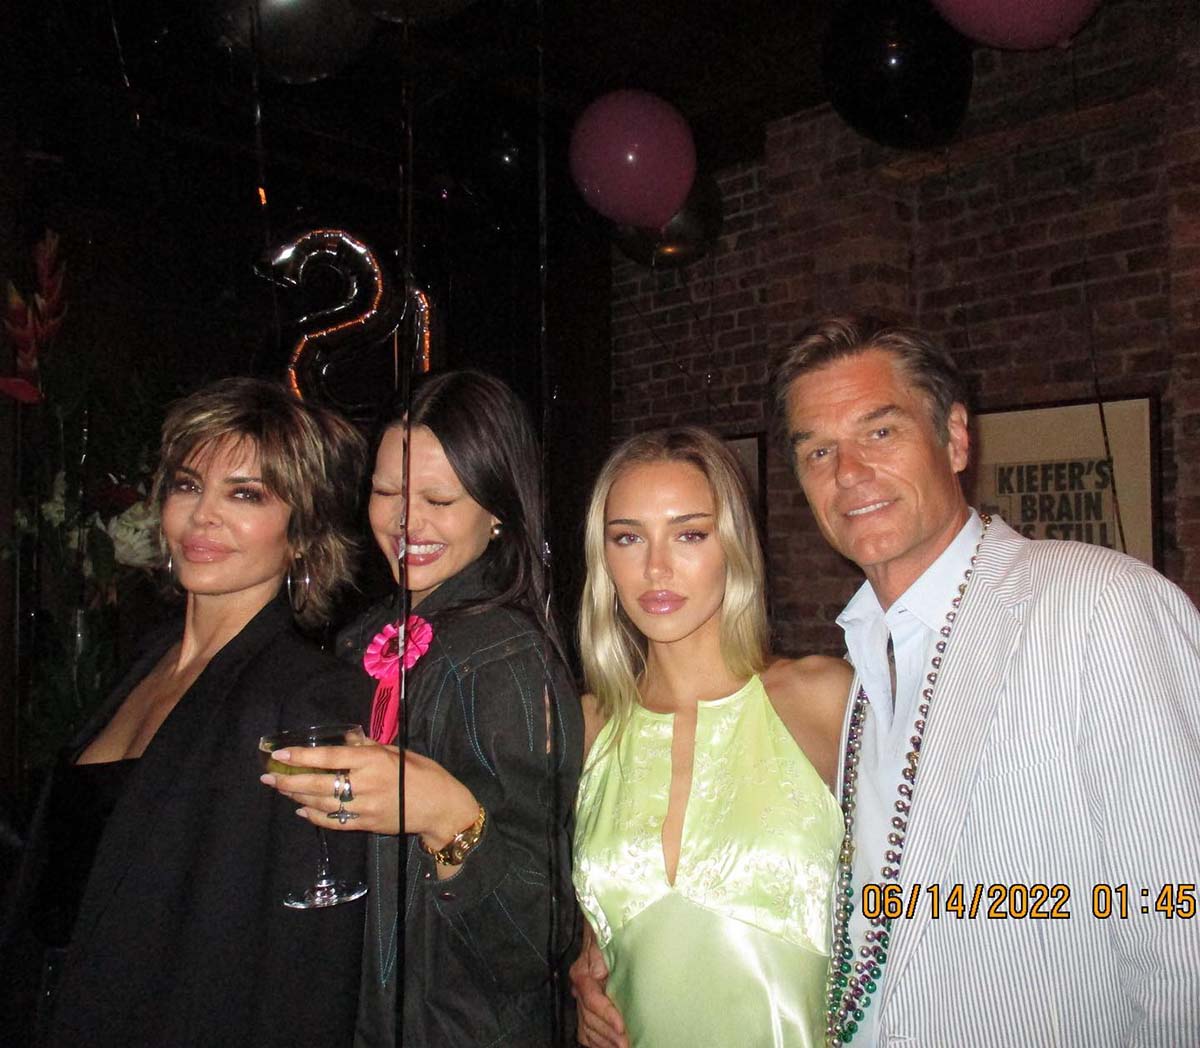 RHOBH Royalty Lisa Rinna Harry Hamlins Family Pics With Their Daughters